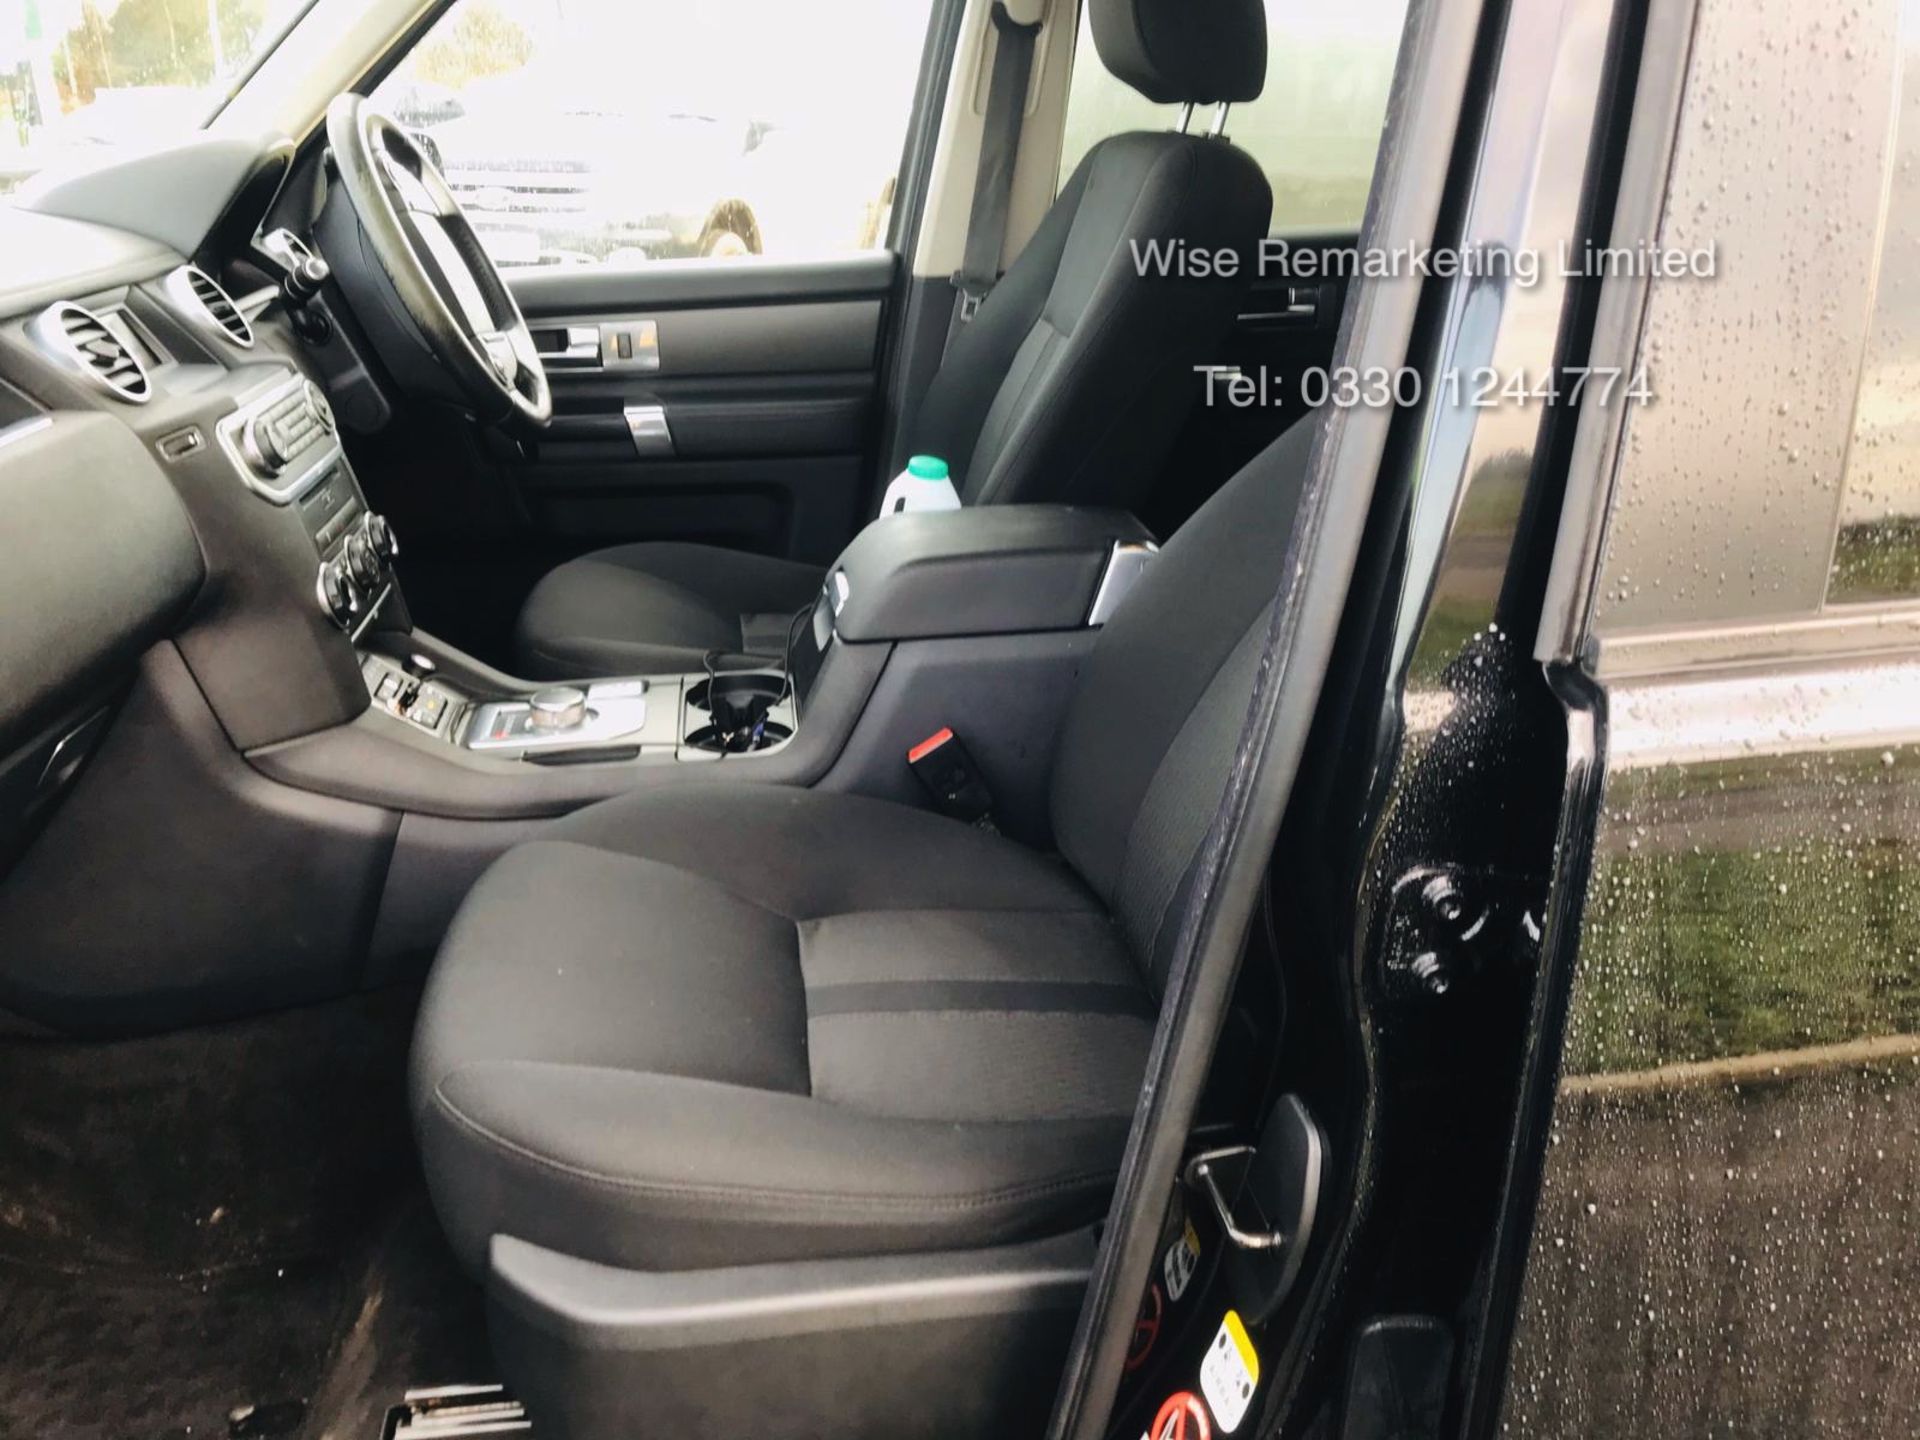 Land Rover Discovery GS 3.0 SDV6 Auto - 2014 Model - 7 Seater - 1 Owner From New - Image 8 of 19